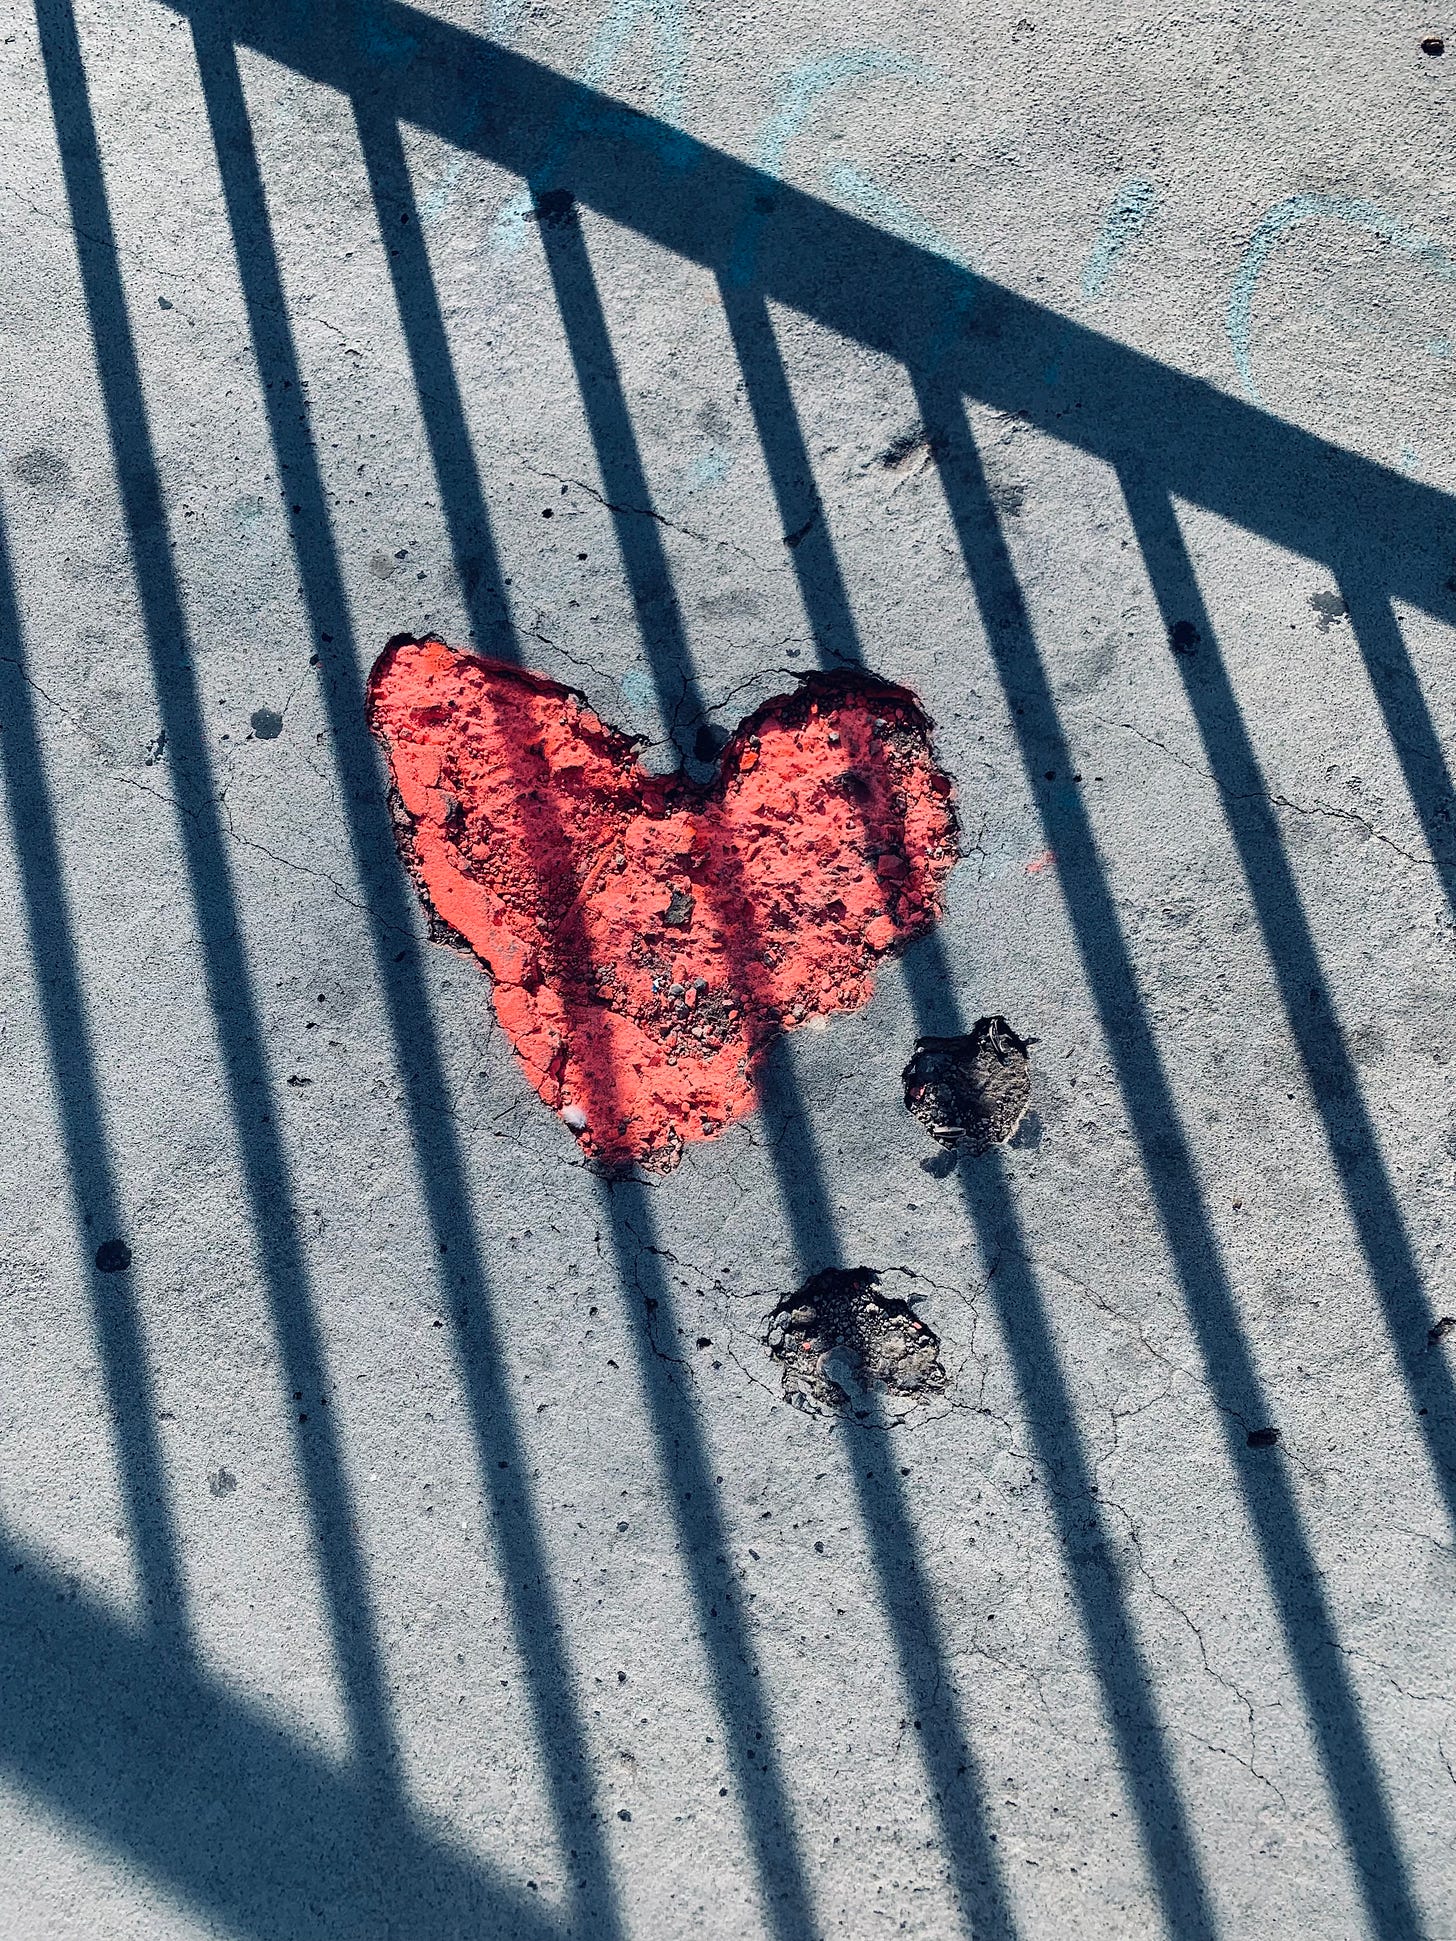 Someone has spray painted a heart-shaped divot in the cement a bright shade of red.